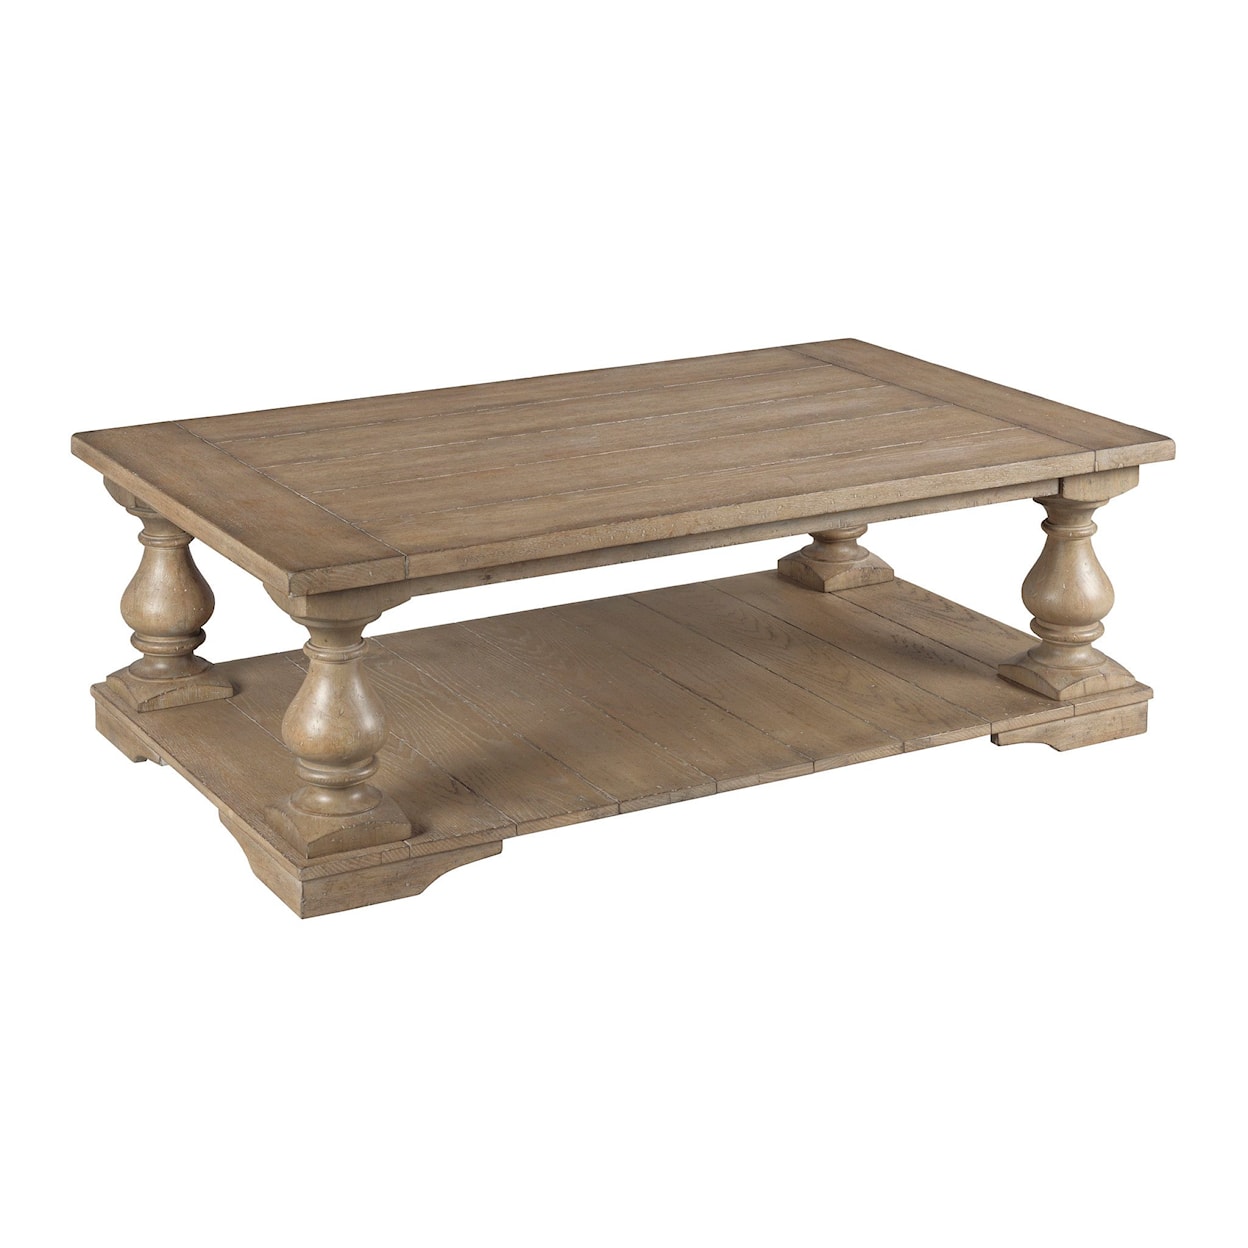 Hammary Donelson Rectangular Coffee Table